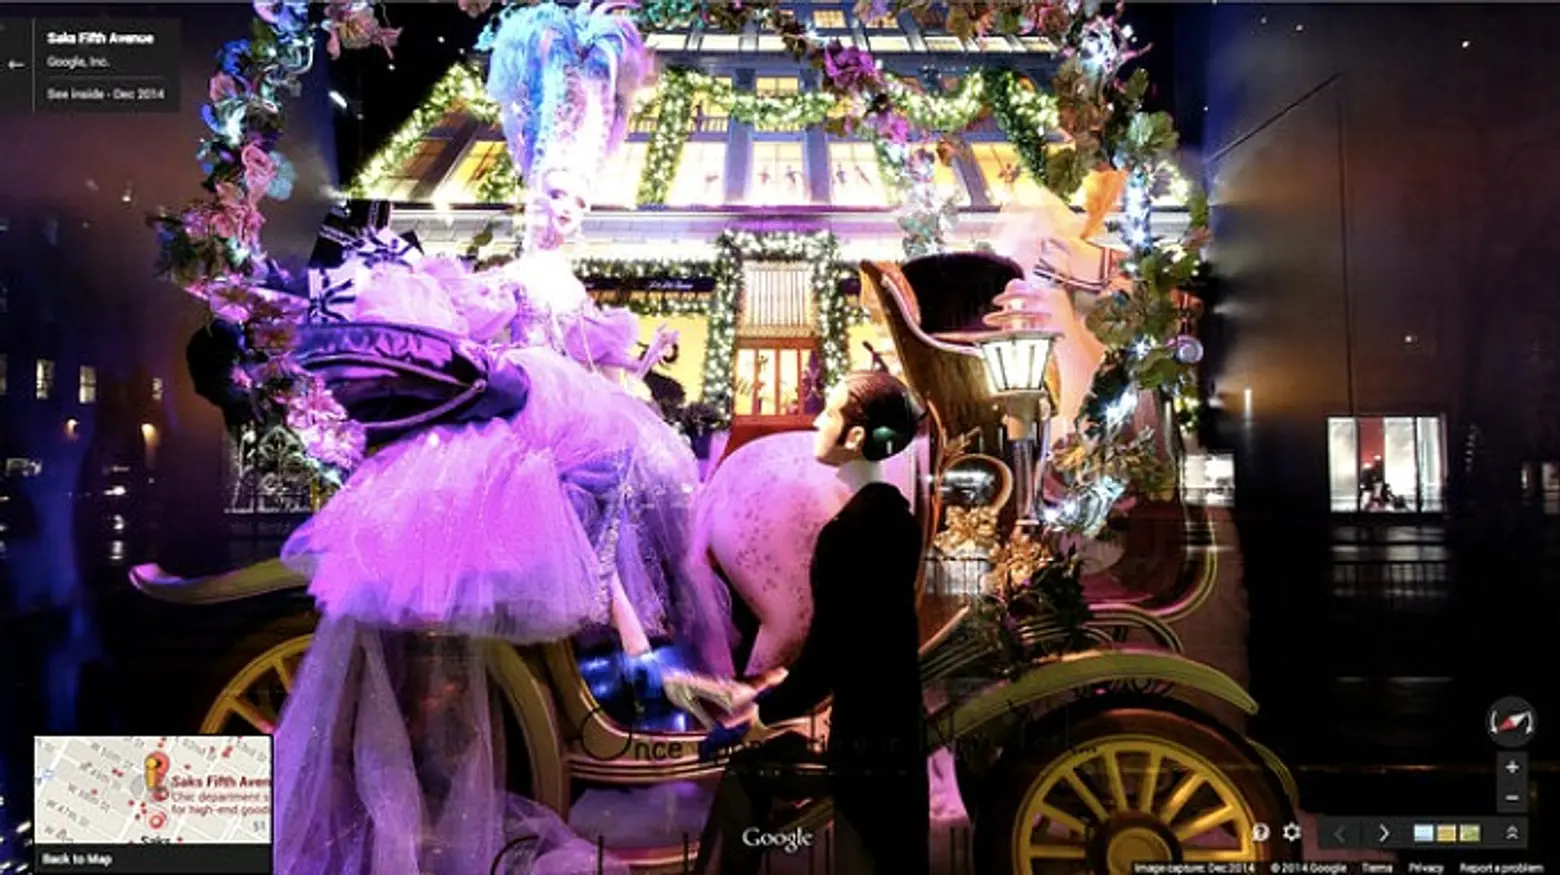 Saks Announced Its Holiday Window Theme